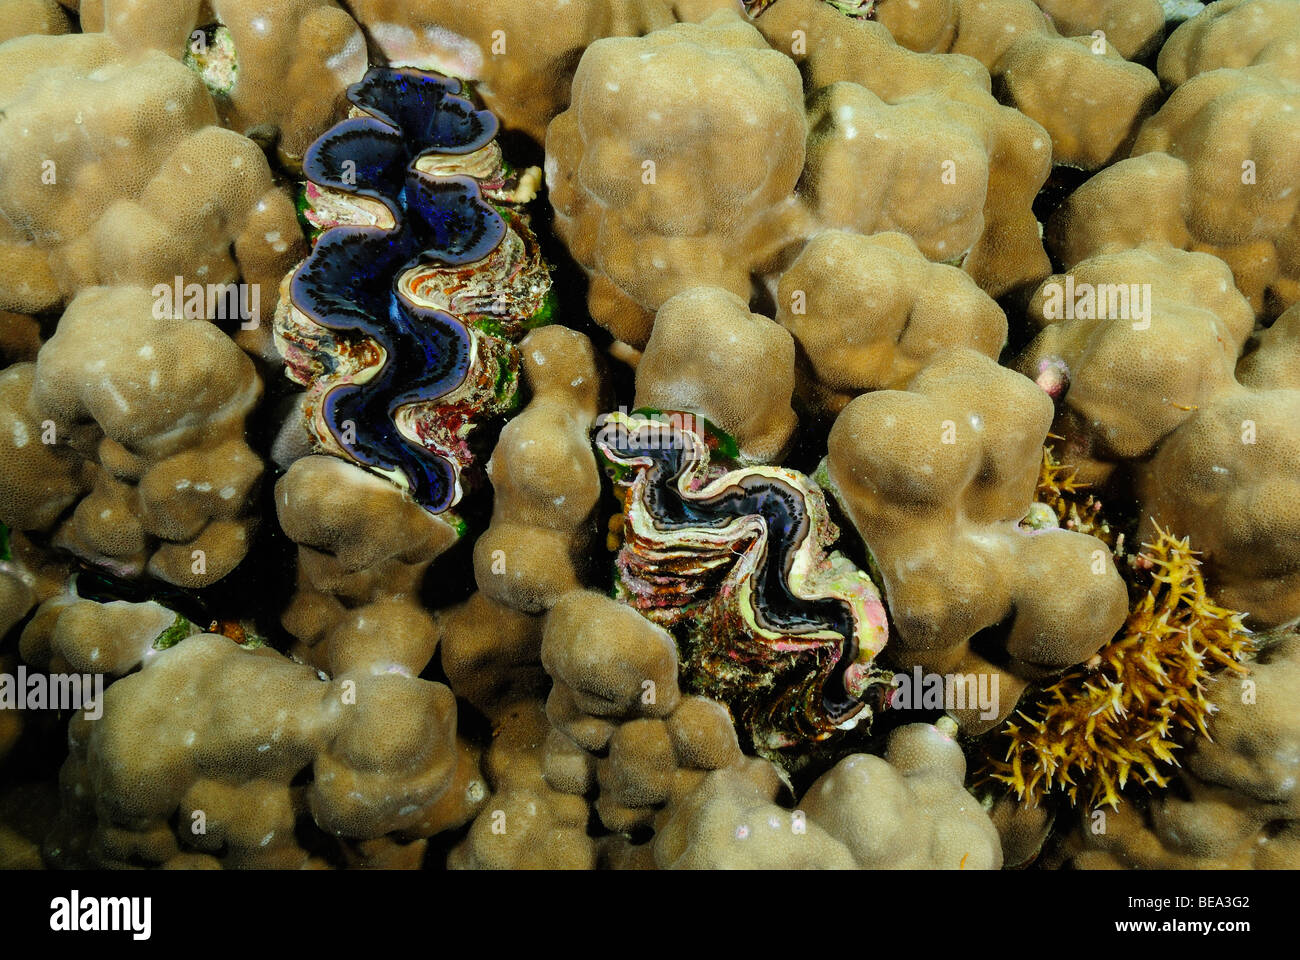 Giant clam growing in coral, Red Egypt. Stock Photo